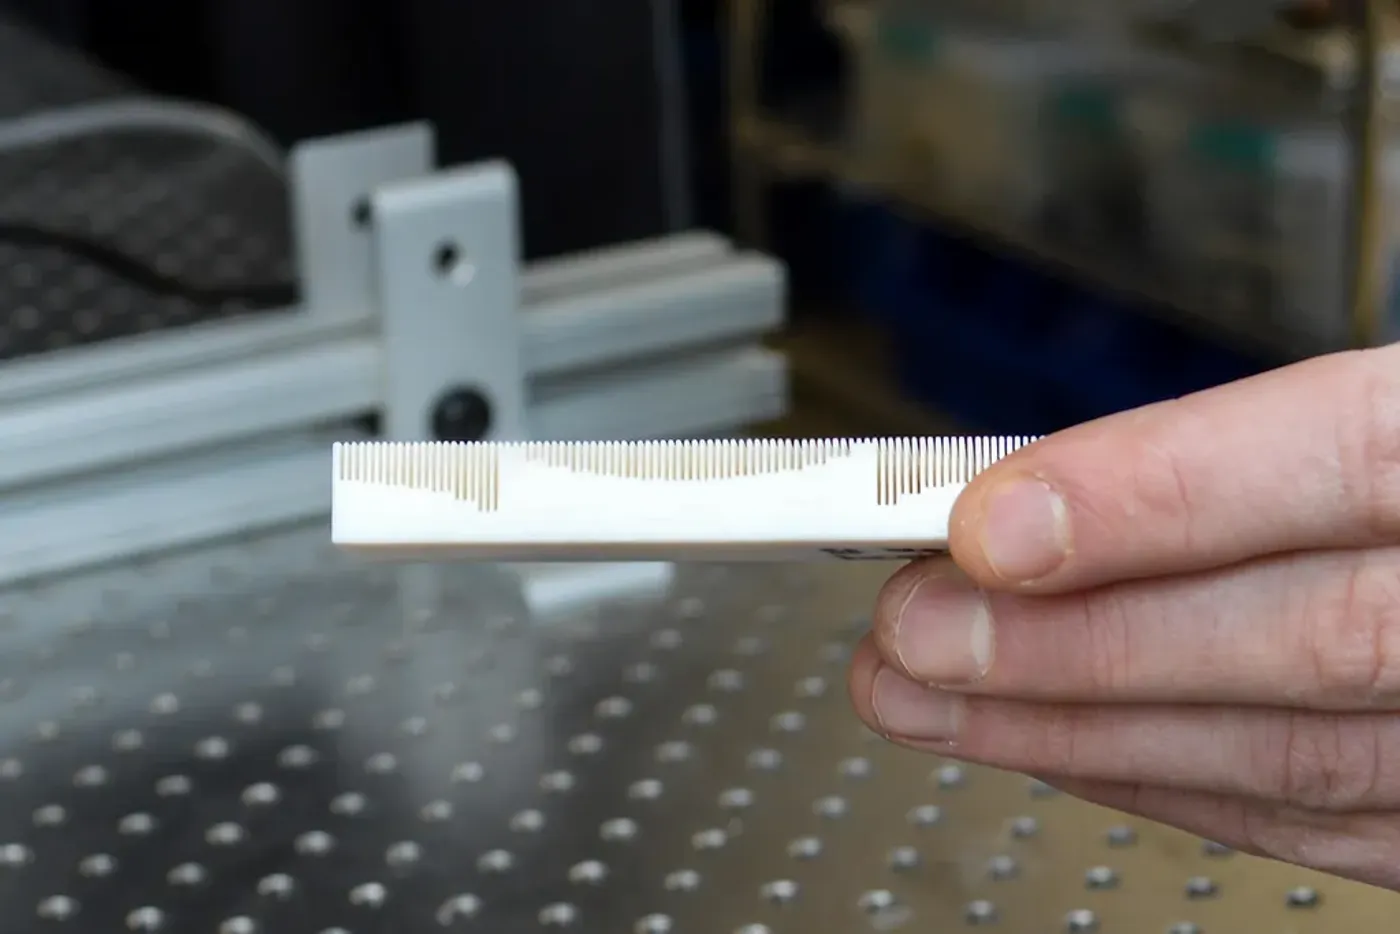 A metamaterial pattern on the surface of an object allows scientists to use sound to steer the object without physically touching it. Credit: Olivia Hultgren